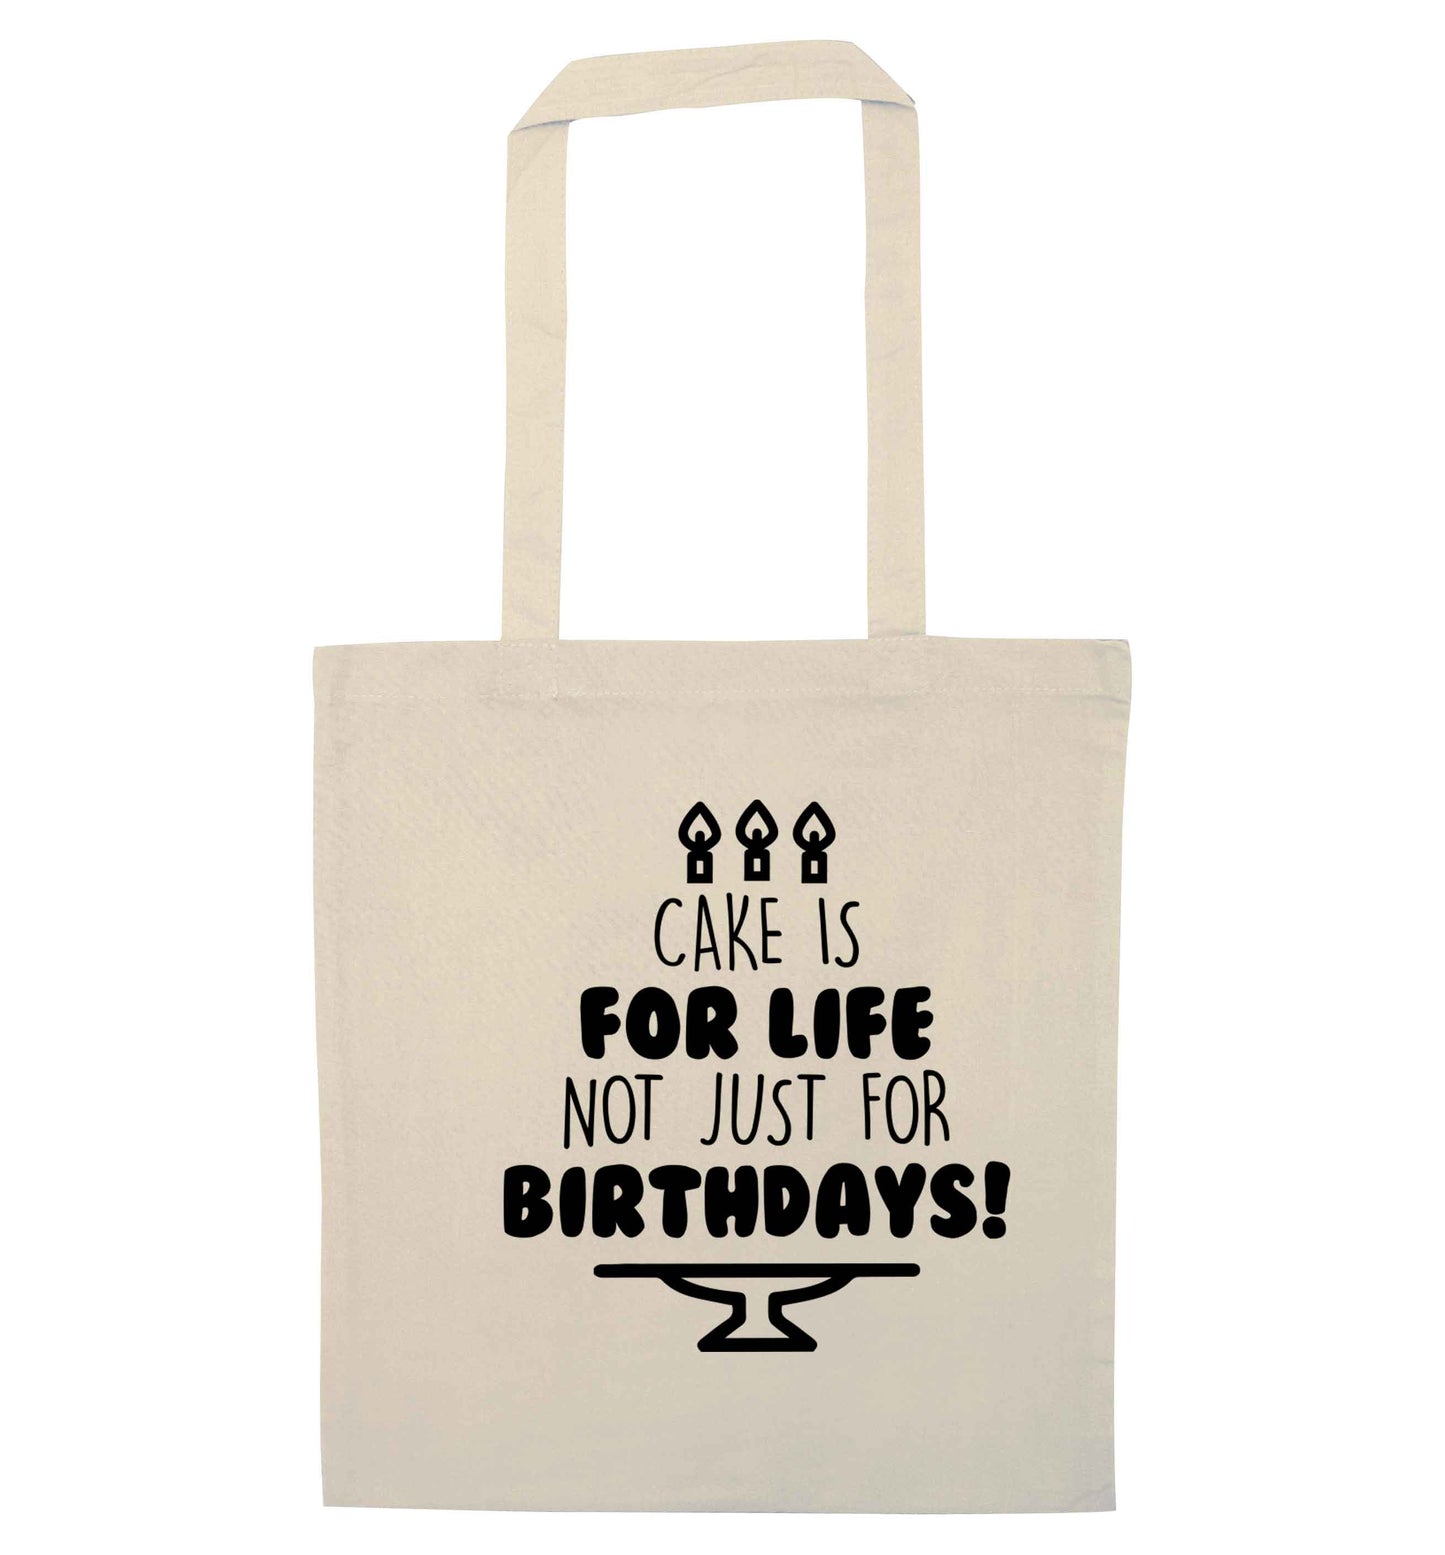 Cake is for life not just for birthdays natural tote bag